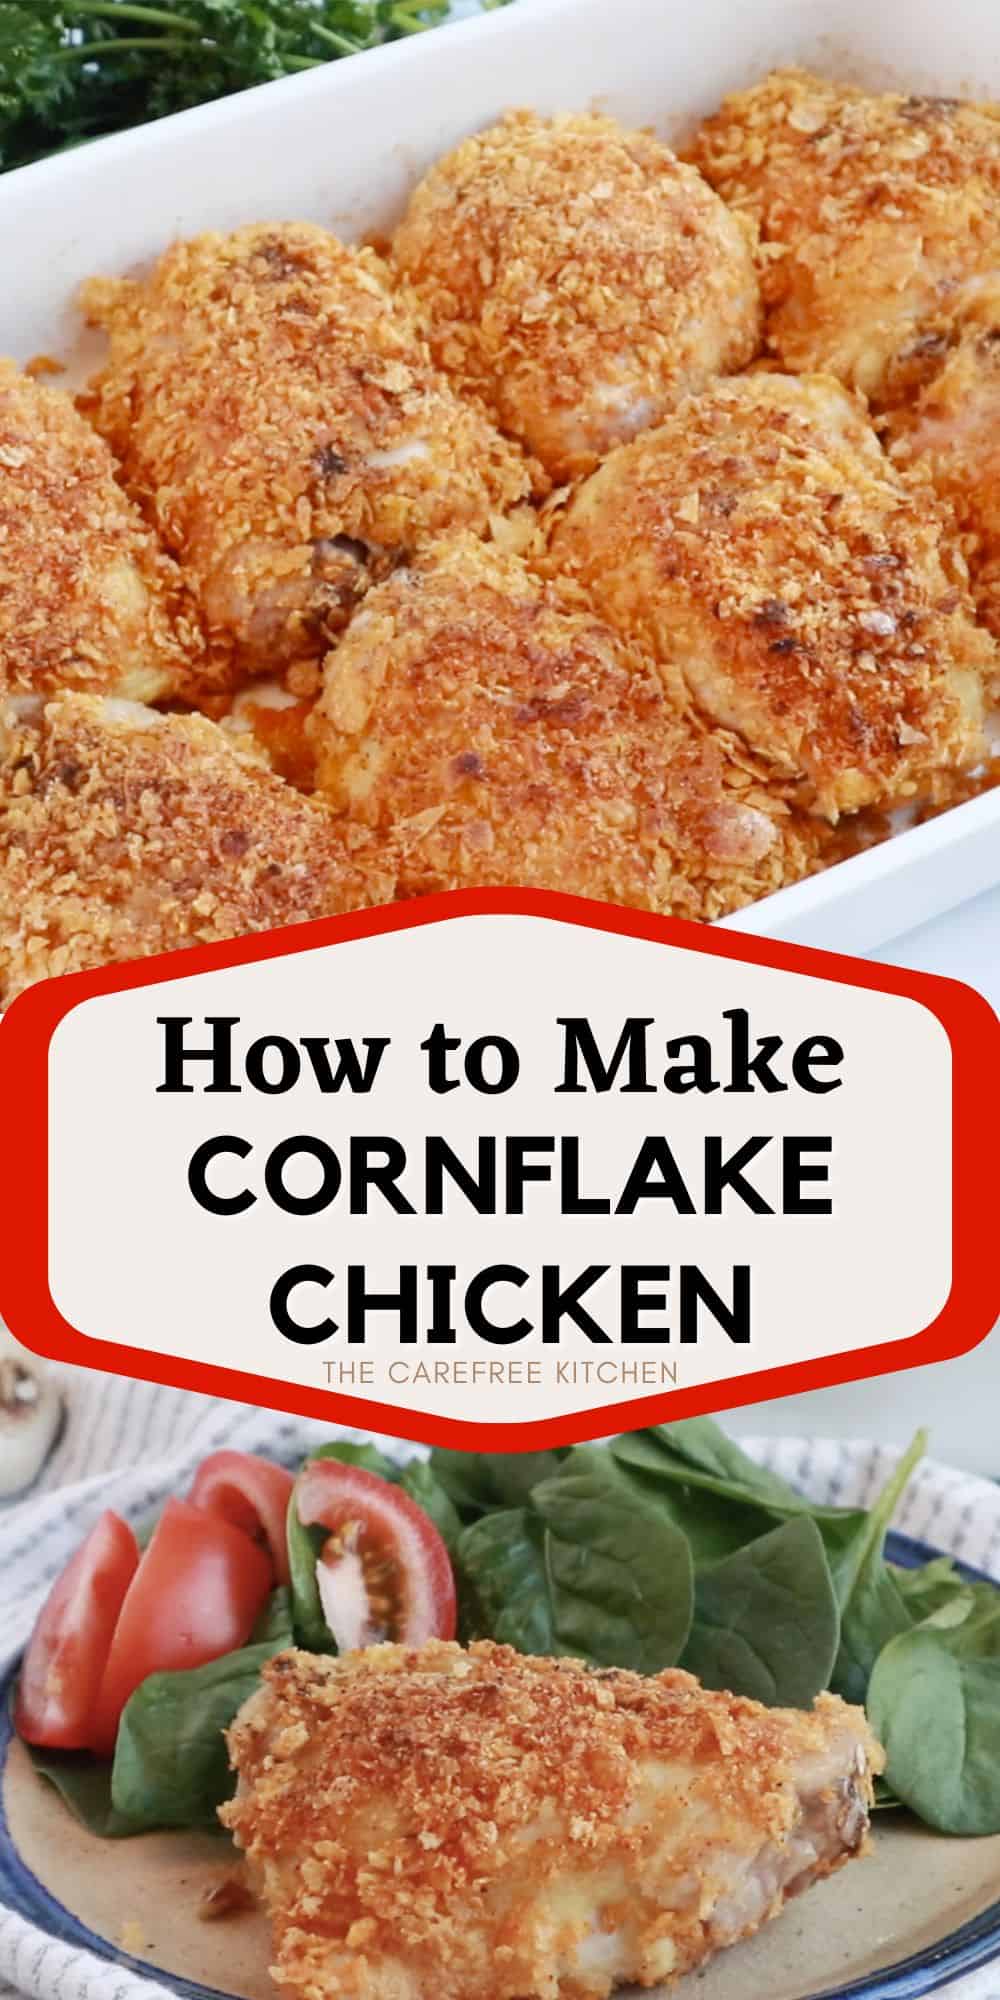 Easy Oven Baked Cornflake Chicken - The Carefree Kitchen